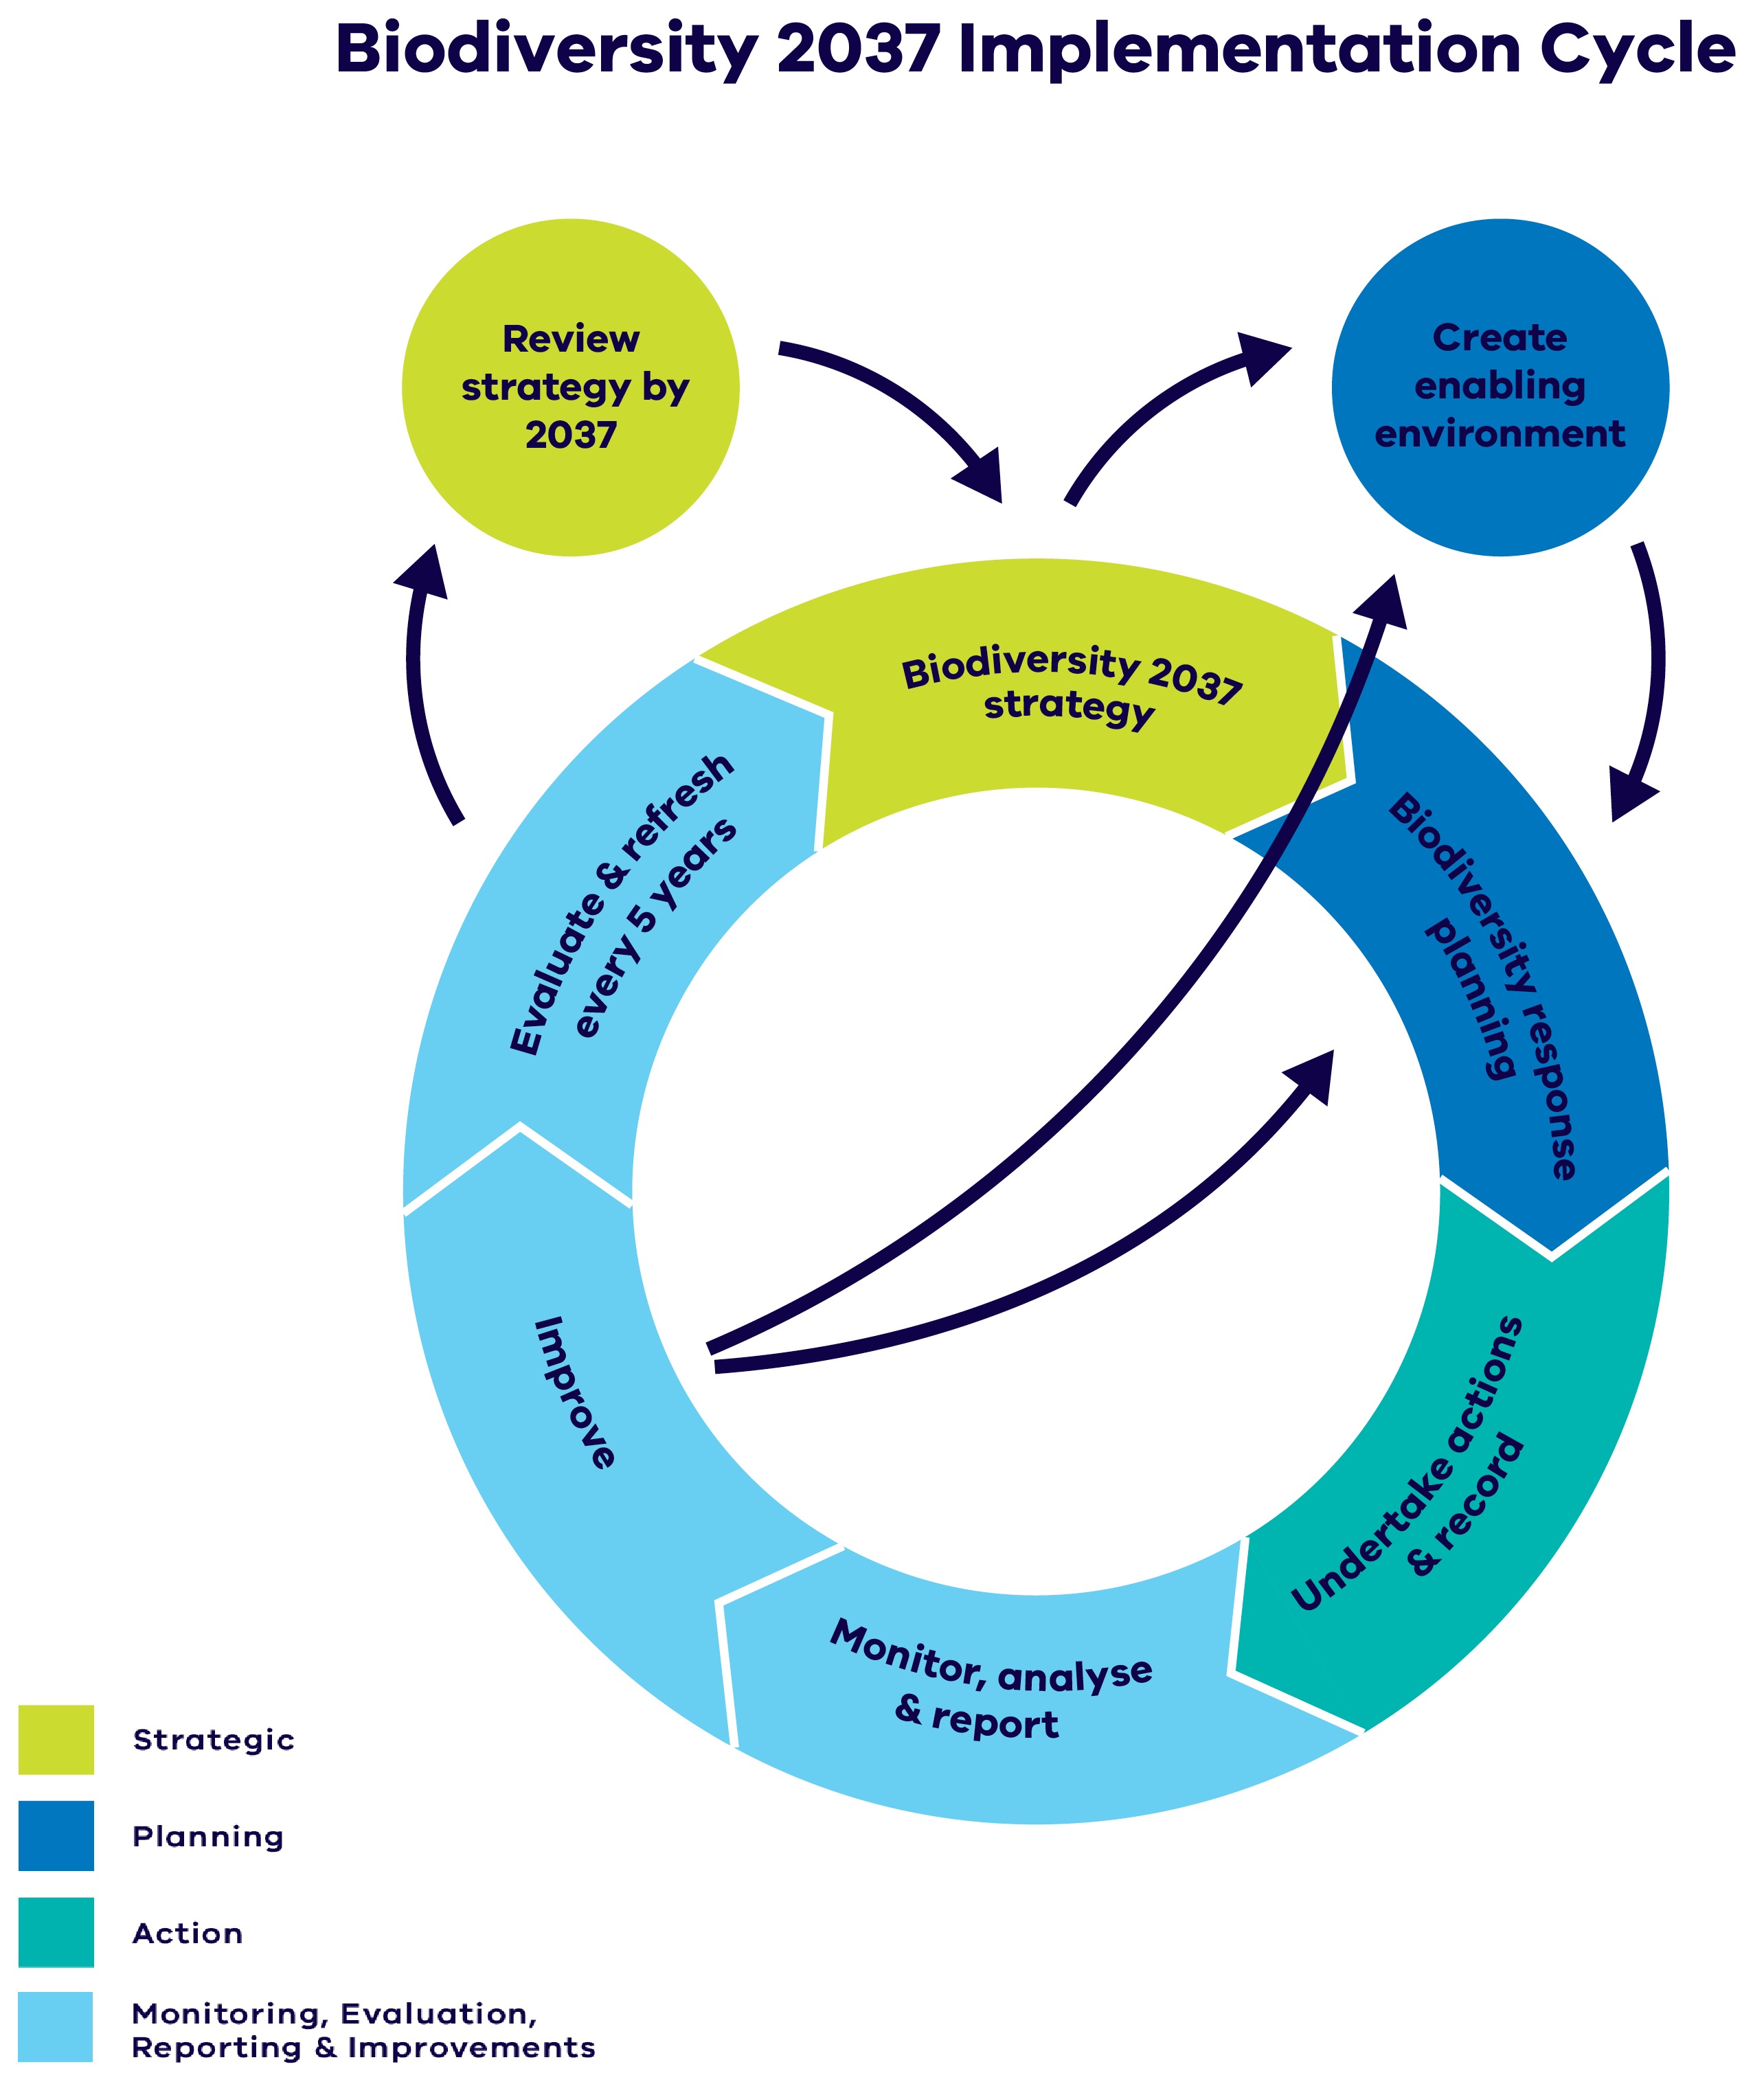 A simplified version of the Bio 2037 Implementation Cycle